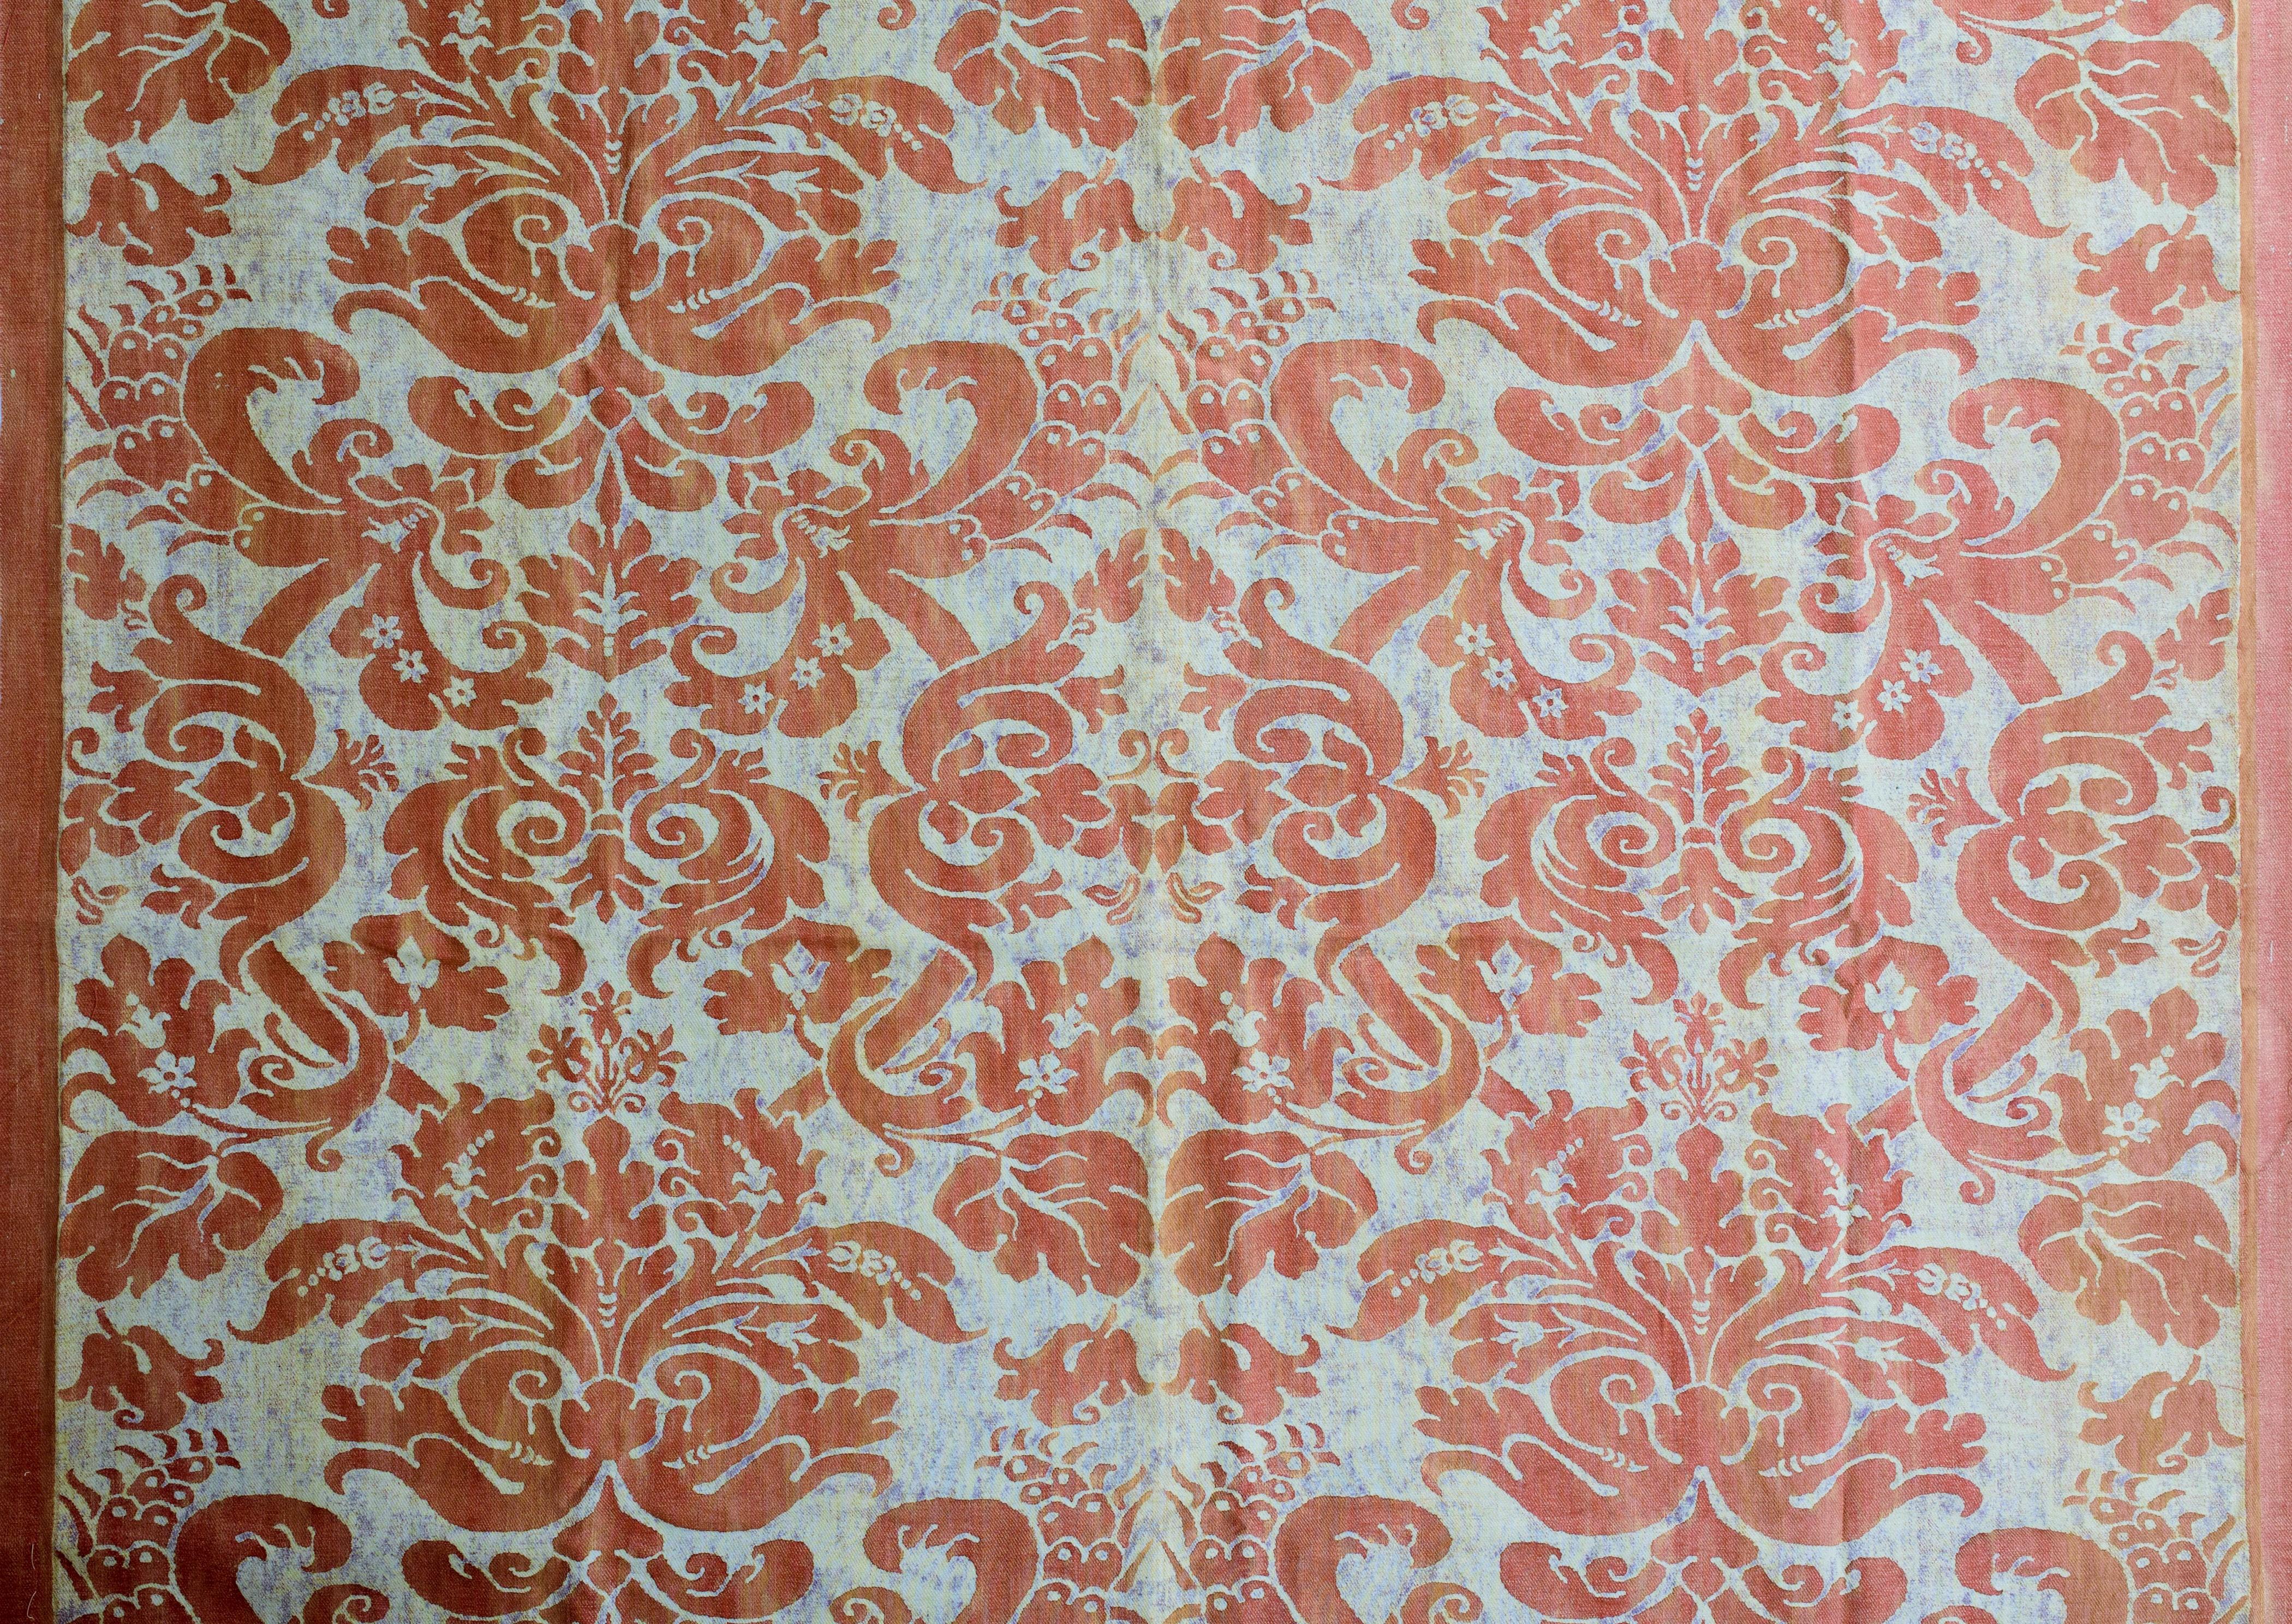 Women's or Men's A Mariano Fortuny Printed Cotton Fabric - Italy Circa 1940 For Sale